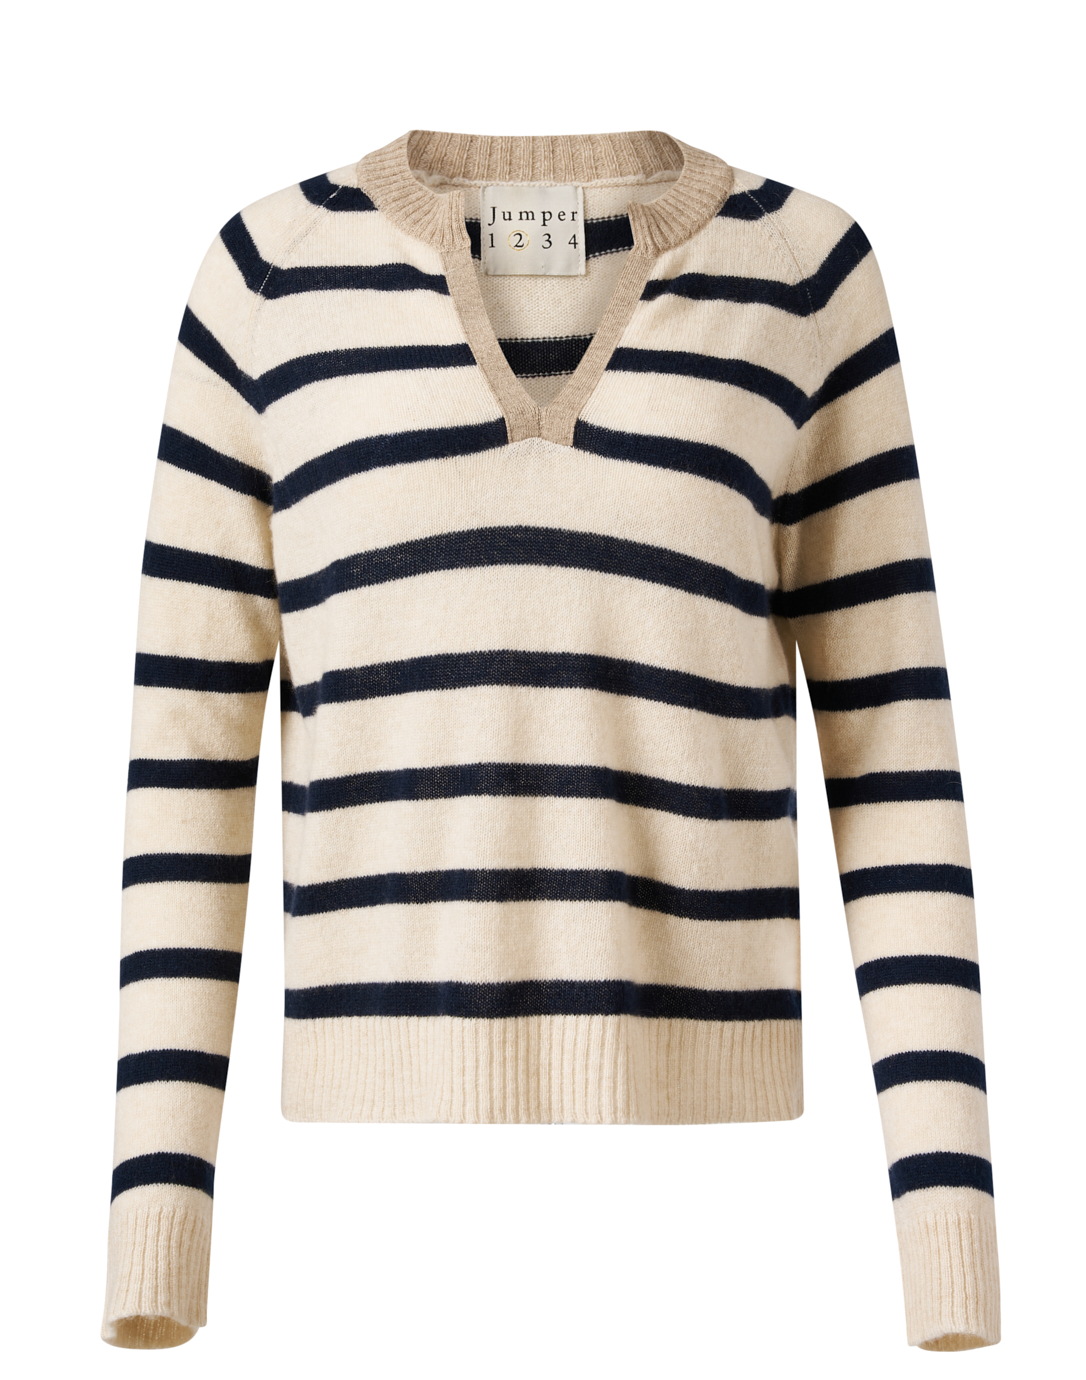 Navy and Beige Striped Cashmere Sweater | Jumper 1234